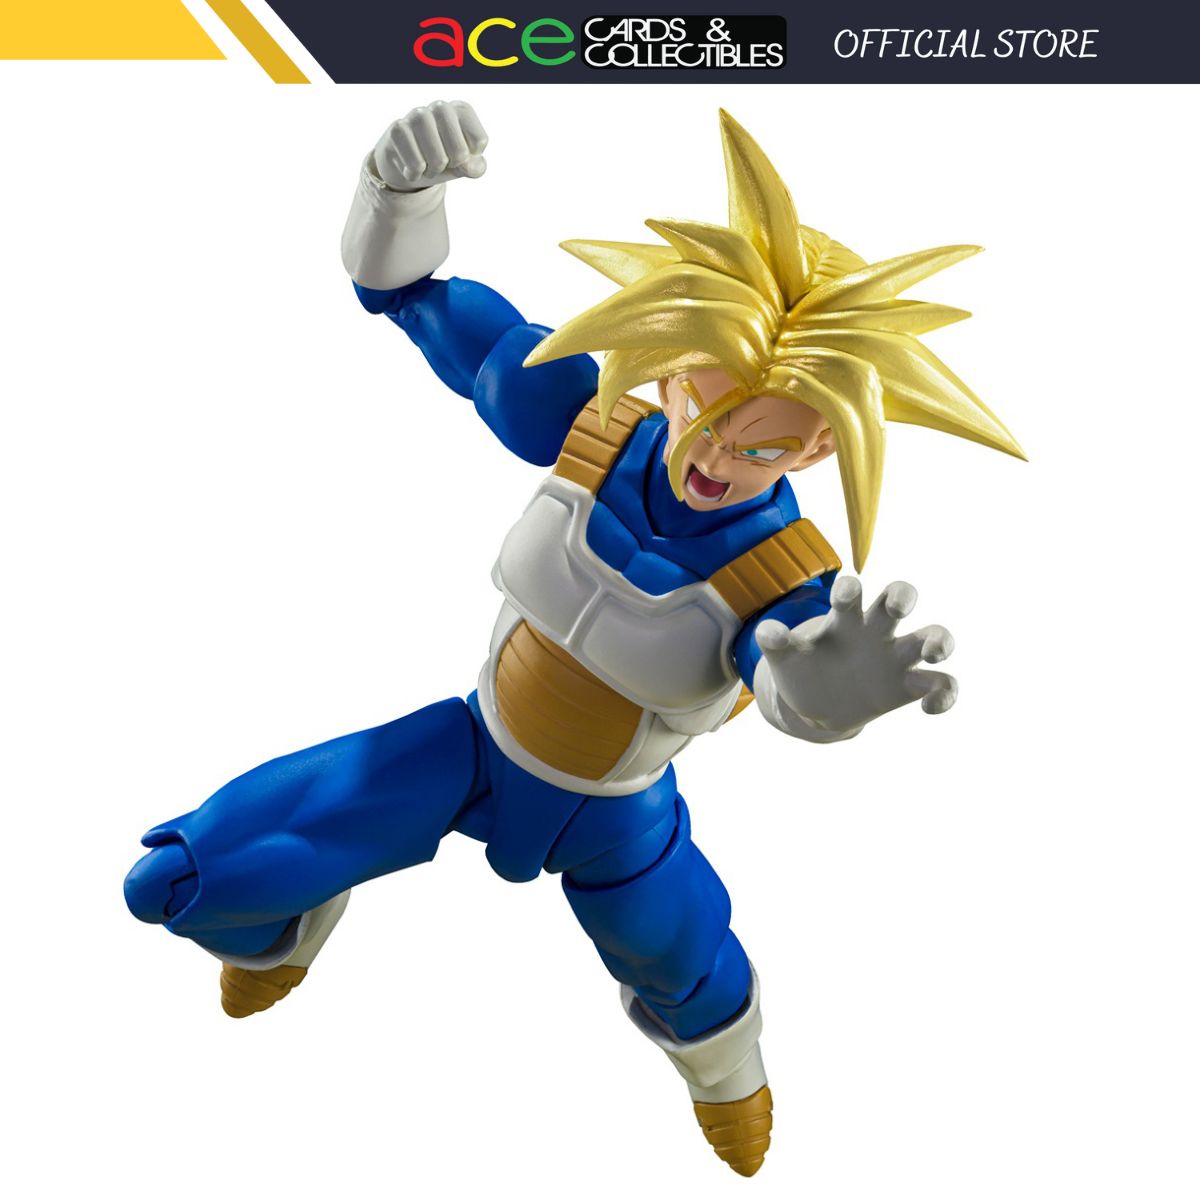 Dragon Ball Z Capsule Neo Super Soldier Trading Figure Set Of 7